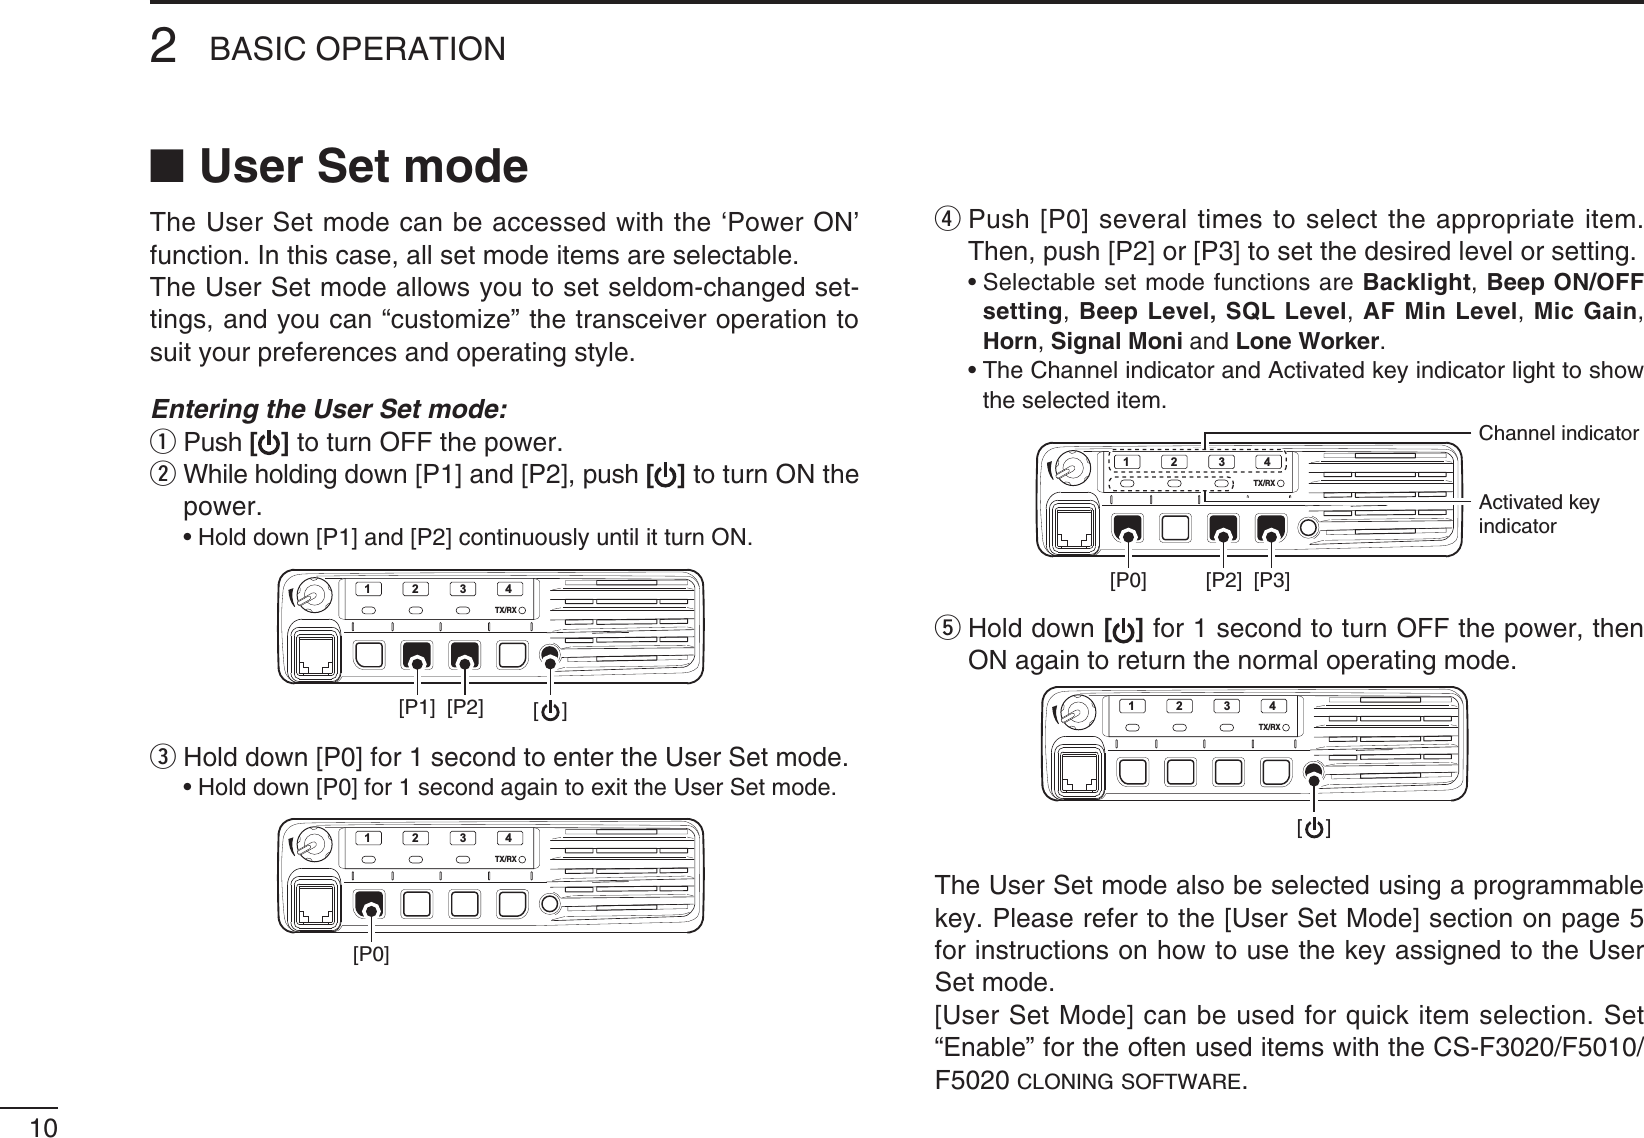 102BASIC OPERATIONN User Set modeThe User Set mode can be accessed with the ‘Power ON’ function. In this case, all set mode items are selectable. The User Set mode allows you to set seldom-changed set-tings, and you can “customize” the transceiver operation to suit your preferences and operating style.Entering the User Set mode:q  Push [] to turn OFF the power.w  While holding down [P1] and [P2], push [] to turn ON the power. s(OLDDOWN;0=AND;0=CONTINUOUSLYUNTILITTURN/.TX/RX1234[P1] [P2] [    ]e  Hold down [P0] for 1 second to enter the User Set mode. s(OLDDOWN;0=FORSECONDAGAINTOEXITTHE5SER3ETMODETX/RX1234[P0]r  Push [P0] several times to select the appropriate item. Then, push [P2] or [P3] to set the desired level or setting. s3ELECTABLESETMODEFUNCTIONSAREBacklight, Beep ON/OFF setting, Beep Level, SQL Level, AF Min Level, Mic Gain, Horn, Signal Moni and Lone Worker. s4HE#HANNELINDICATORAND!CTIVATEDKEYINDICATORLIGHTTOSHOWthe selected item.TX/RX1234[P0] [P2] [P3]Channel indicatorActivated keyindicatort  Hold down [ ] for 1 second to turn OFF the power, then ON again to return the normal operating mode.TX/RX1234[    ]The User Set mode also be selected using a programmable key. Please refer to the [User Set Mode] section on page 5 for instructions on how to use the key assigned to the User Set mode.[User Set Mode] can be used for quick item selection. Set h%NABLEvFORTHEOFTENUSEDITEMSWITHTHE#3&amp;&amp;F5020 CLONING SOFTWARE.